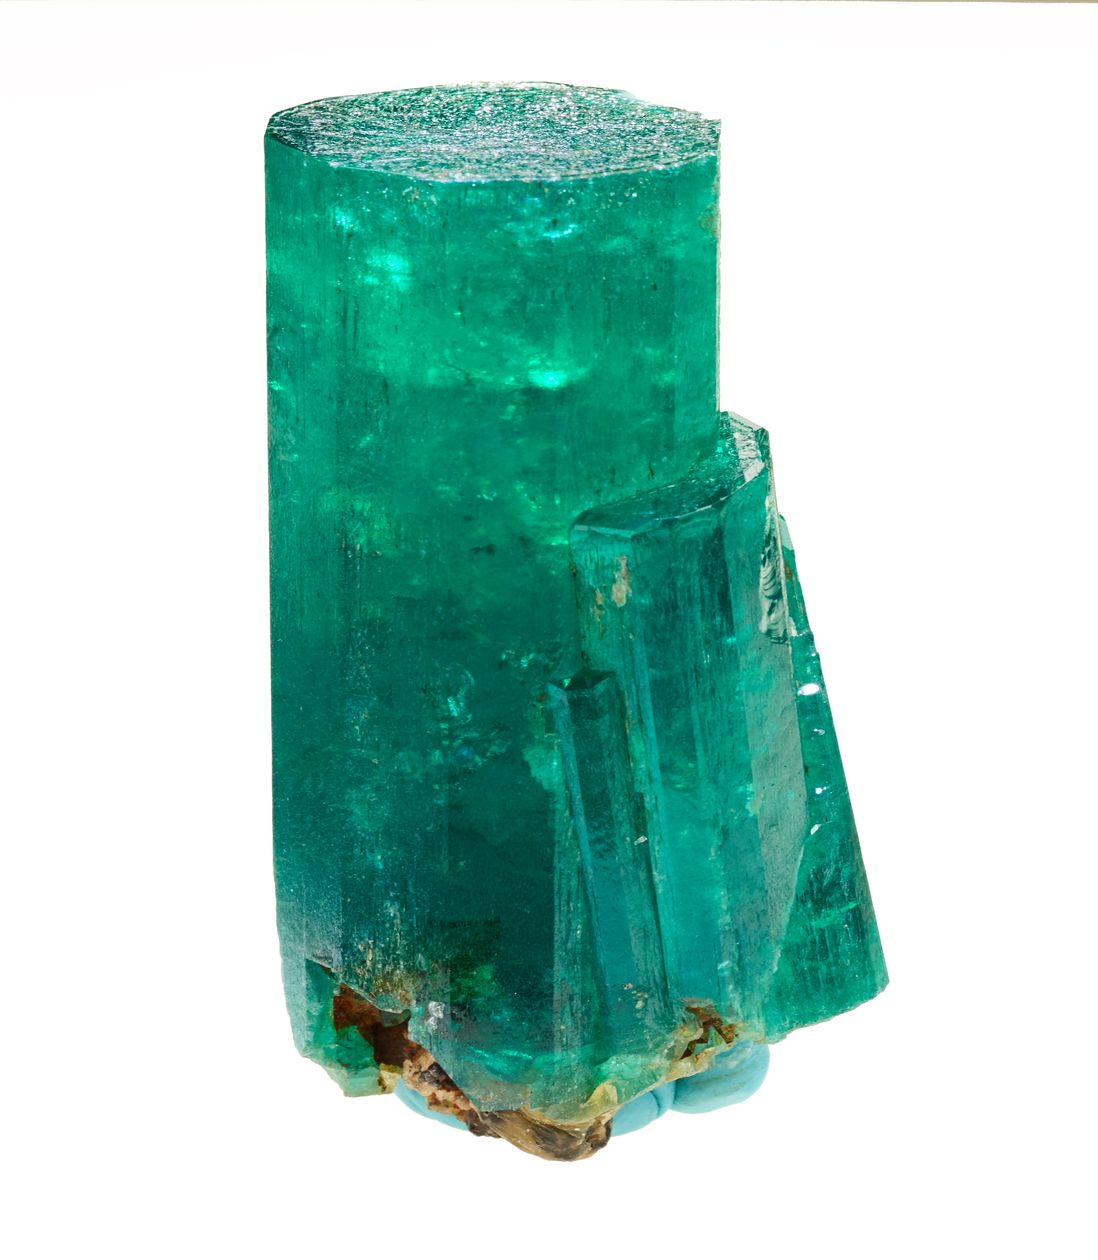 A large hunk of green emerald, unpolished, in the vague shape of a cylinder